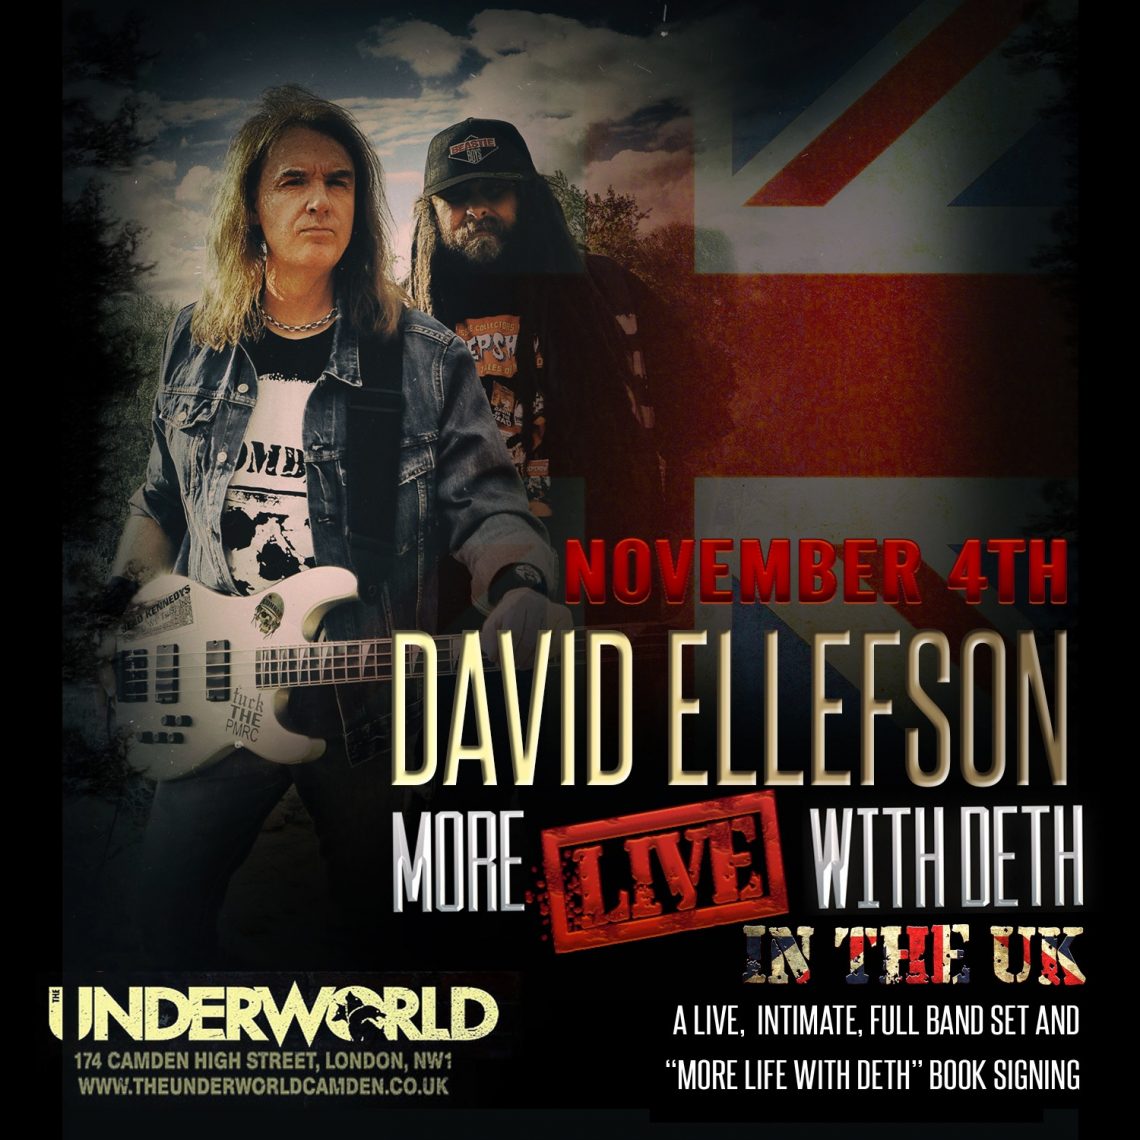 DAVID ELLEFSON ANNOUNCES EUROPEAN ‘MORE LIVE WITH DETH’ TOUR, INCLUDING SPECIAL ONE-OFF WOLVERHAMPTON SHOW FEATURING JUDAS PRIEST LEGENDS  KK DOWNING, LES BINKS and TIM “RIPPER” OWENS.